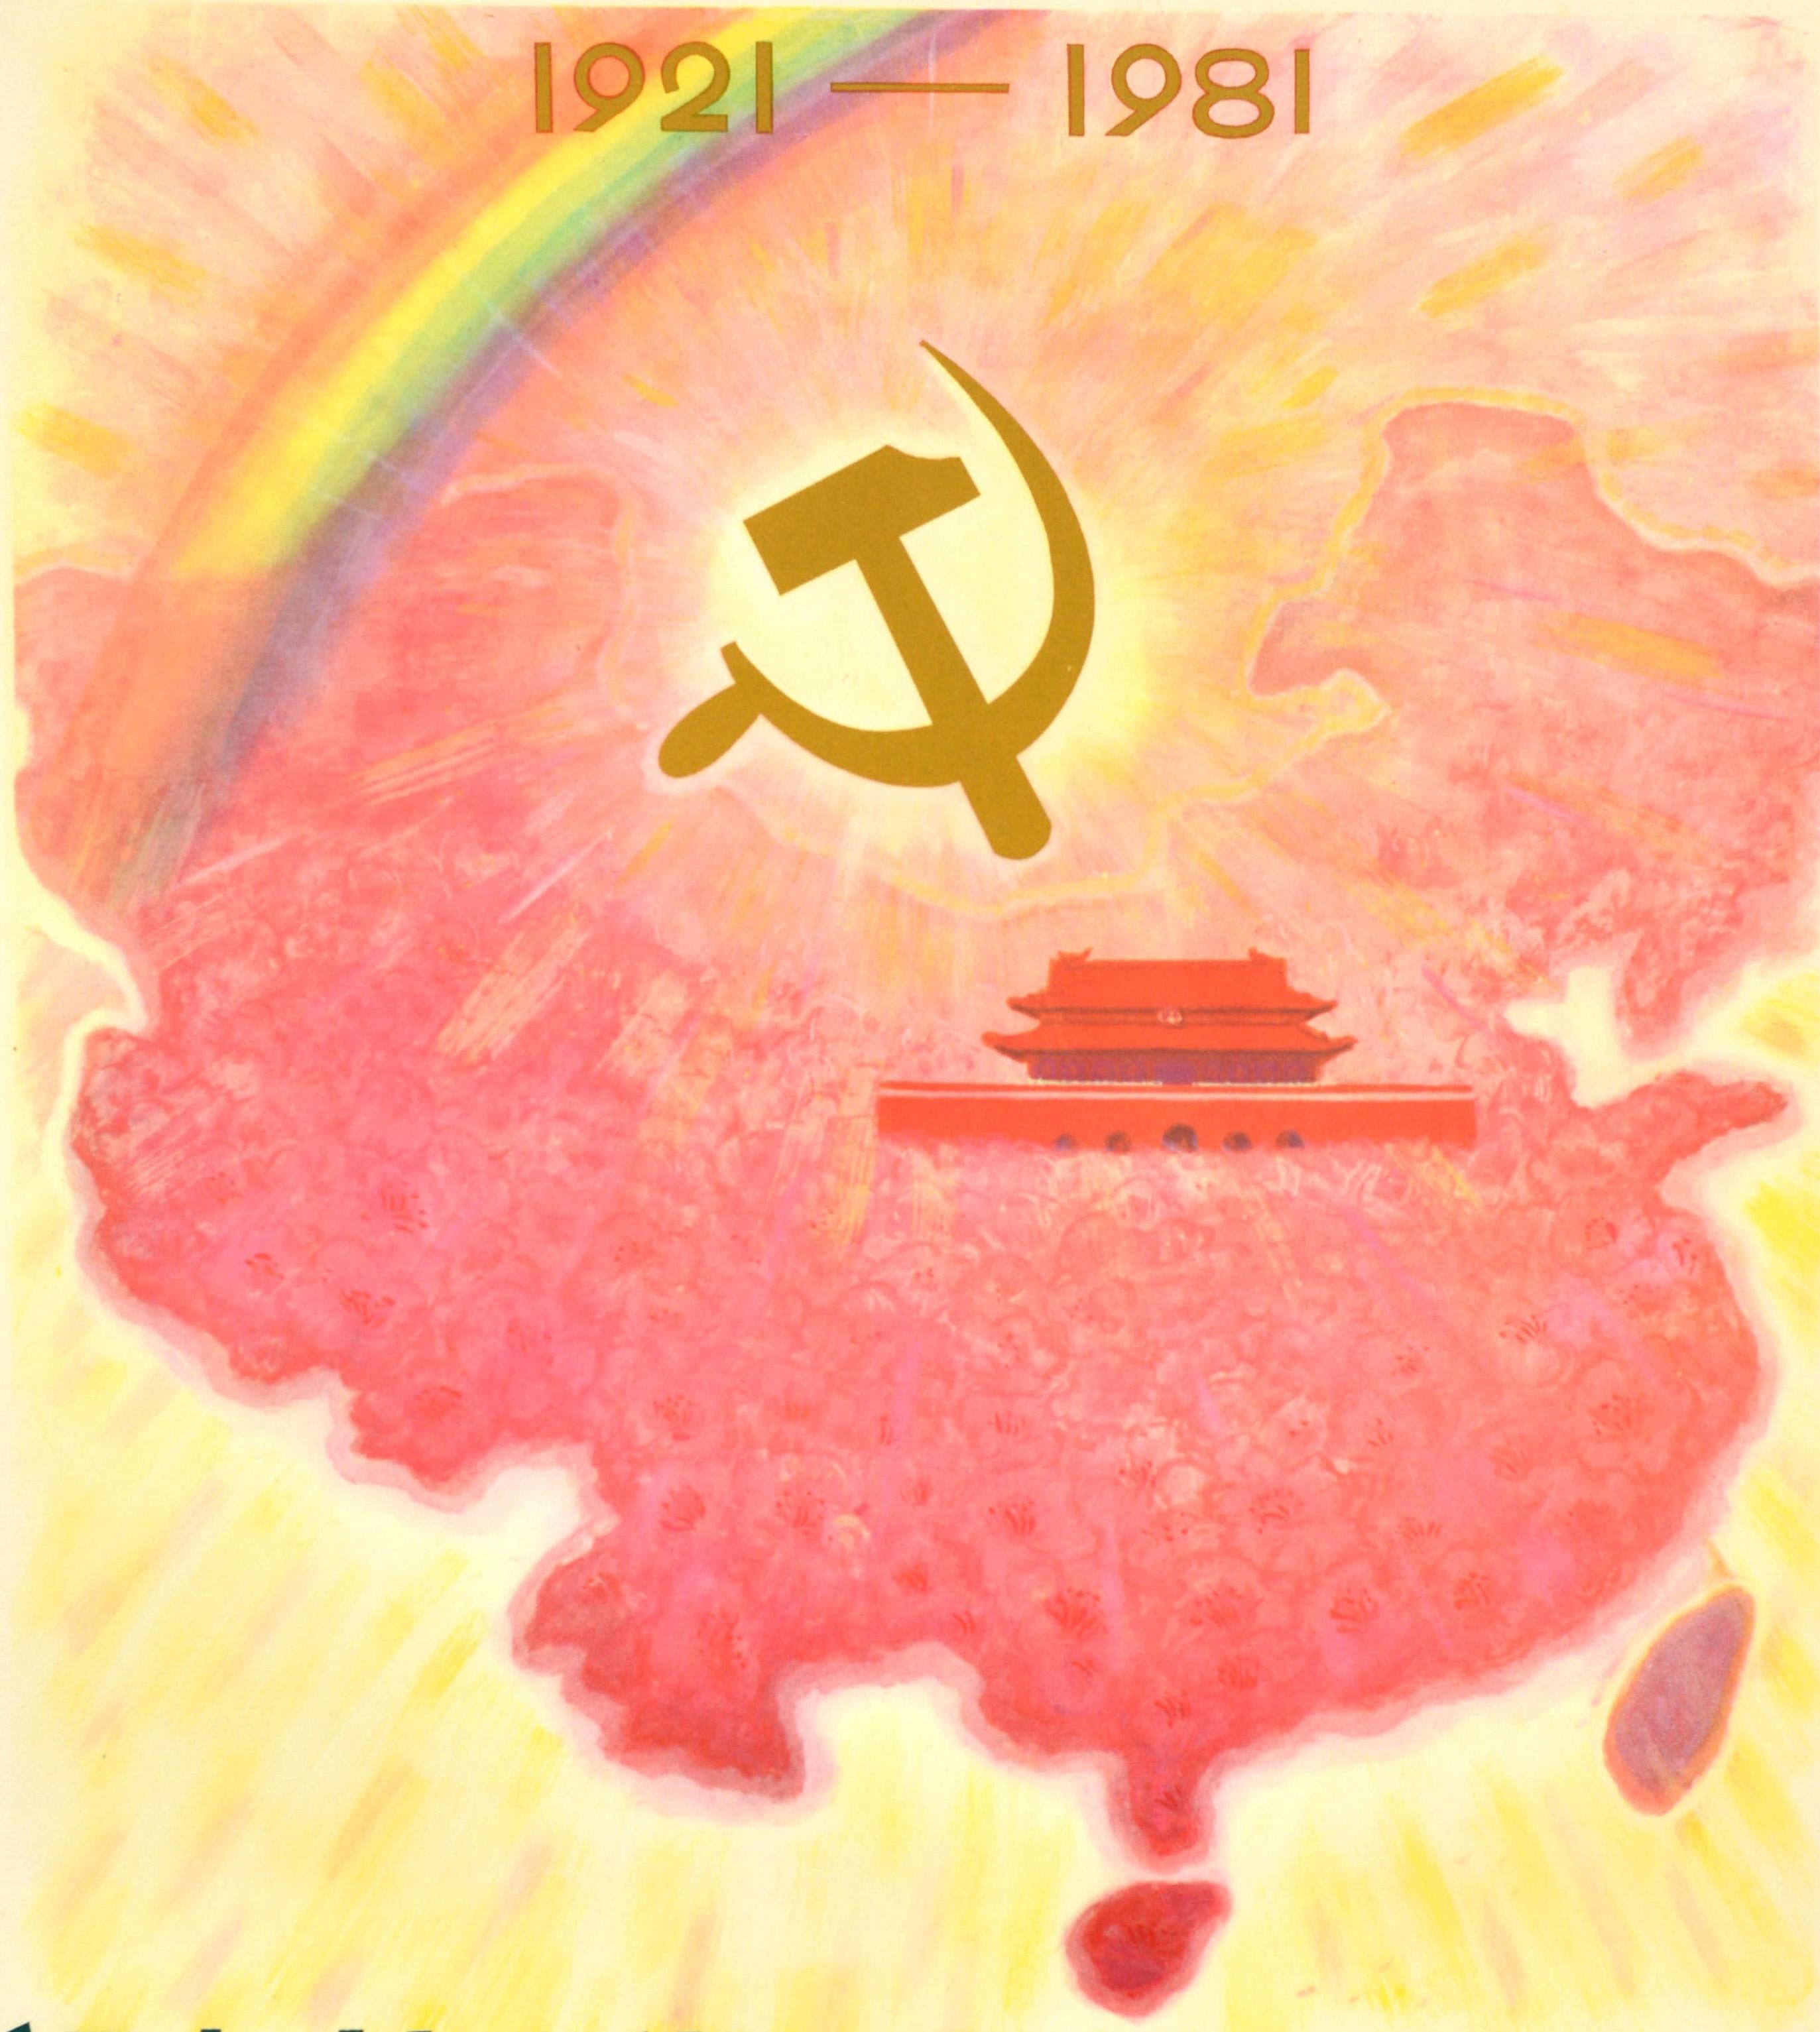 Original vintage Chinese Communist Party propaganda poster commemorating the 60th anniversary of the founding of the party: 1921-1981 Without the Communist Party There Would Be No New China / 没有共产党 就没有新中国 - featuring an illustration of a rainbow